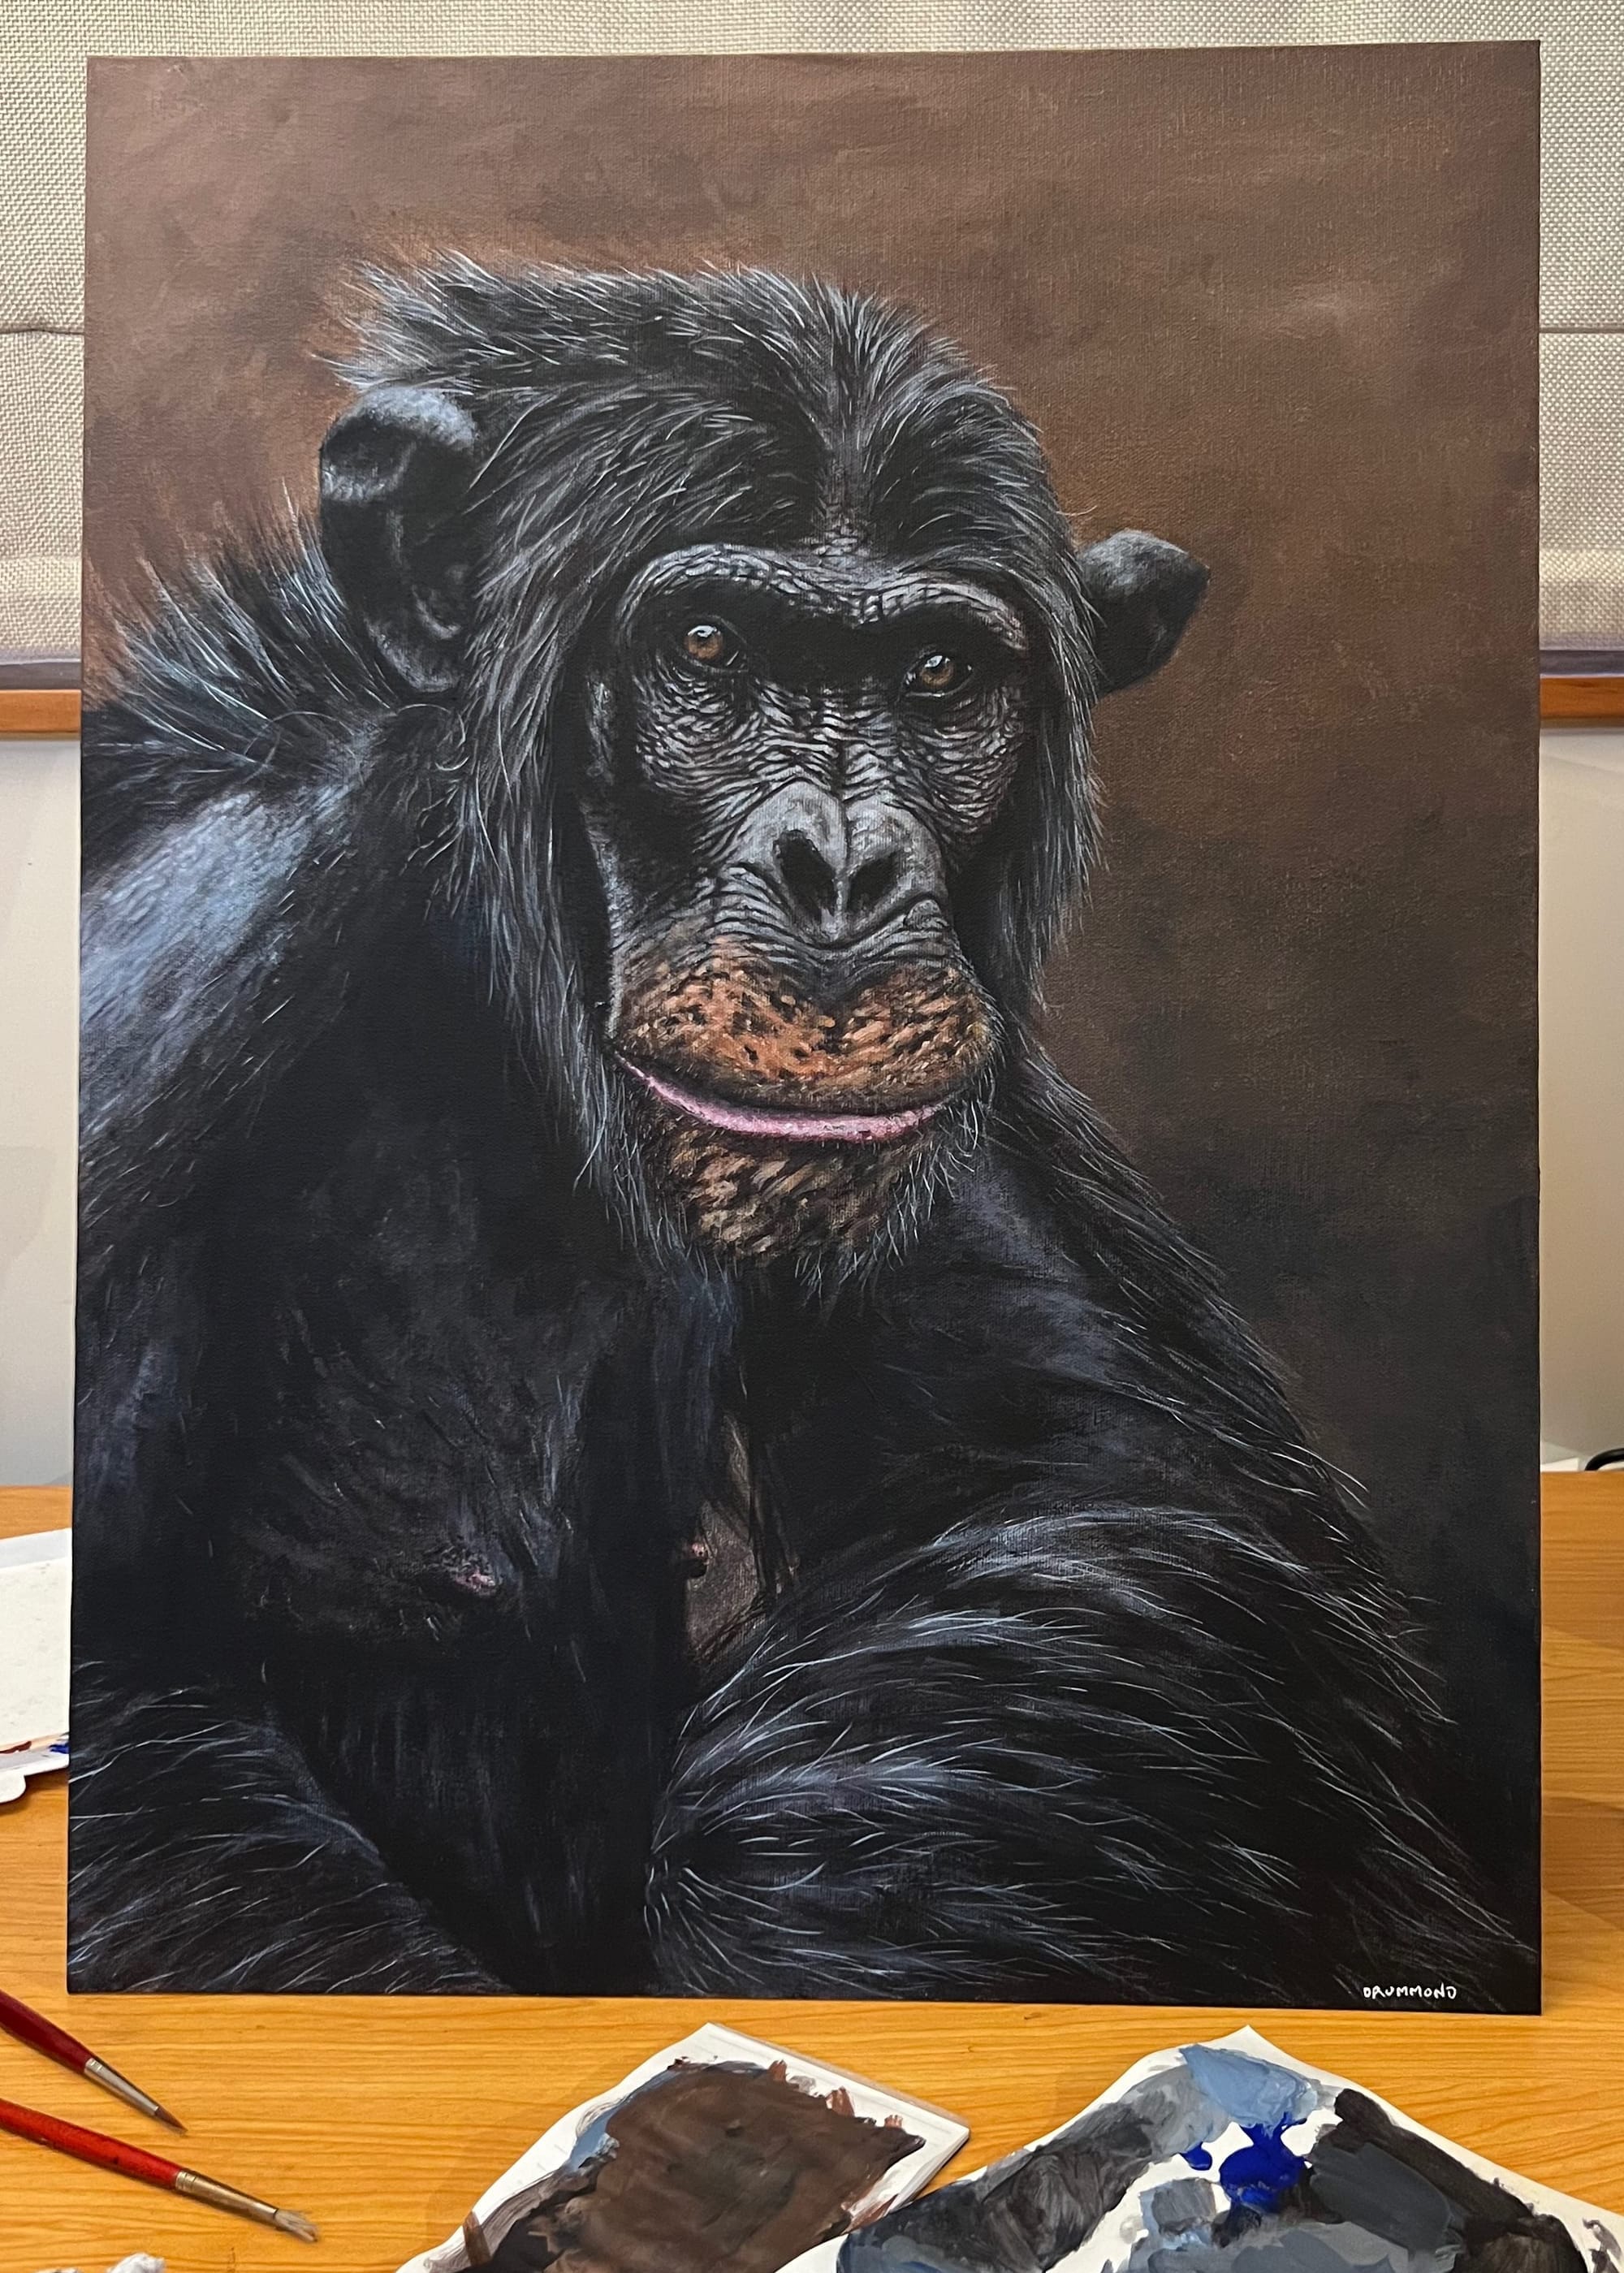 A painting of a Bored Ape, surrounded by used art materials.